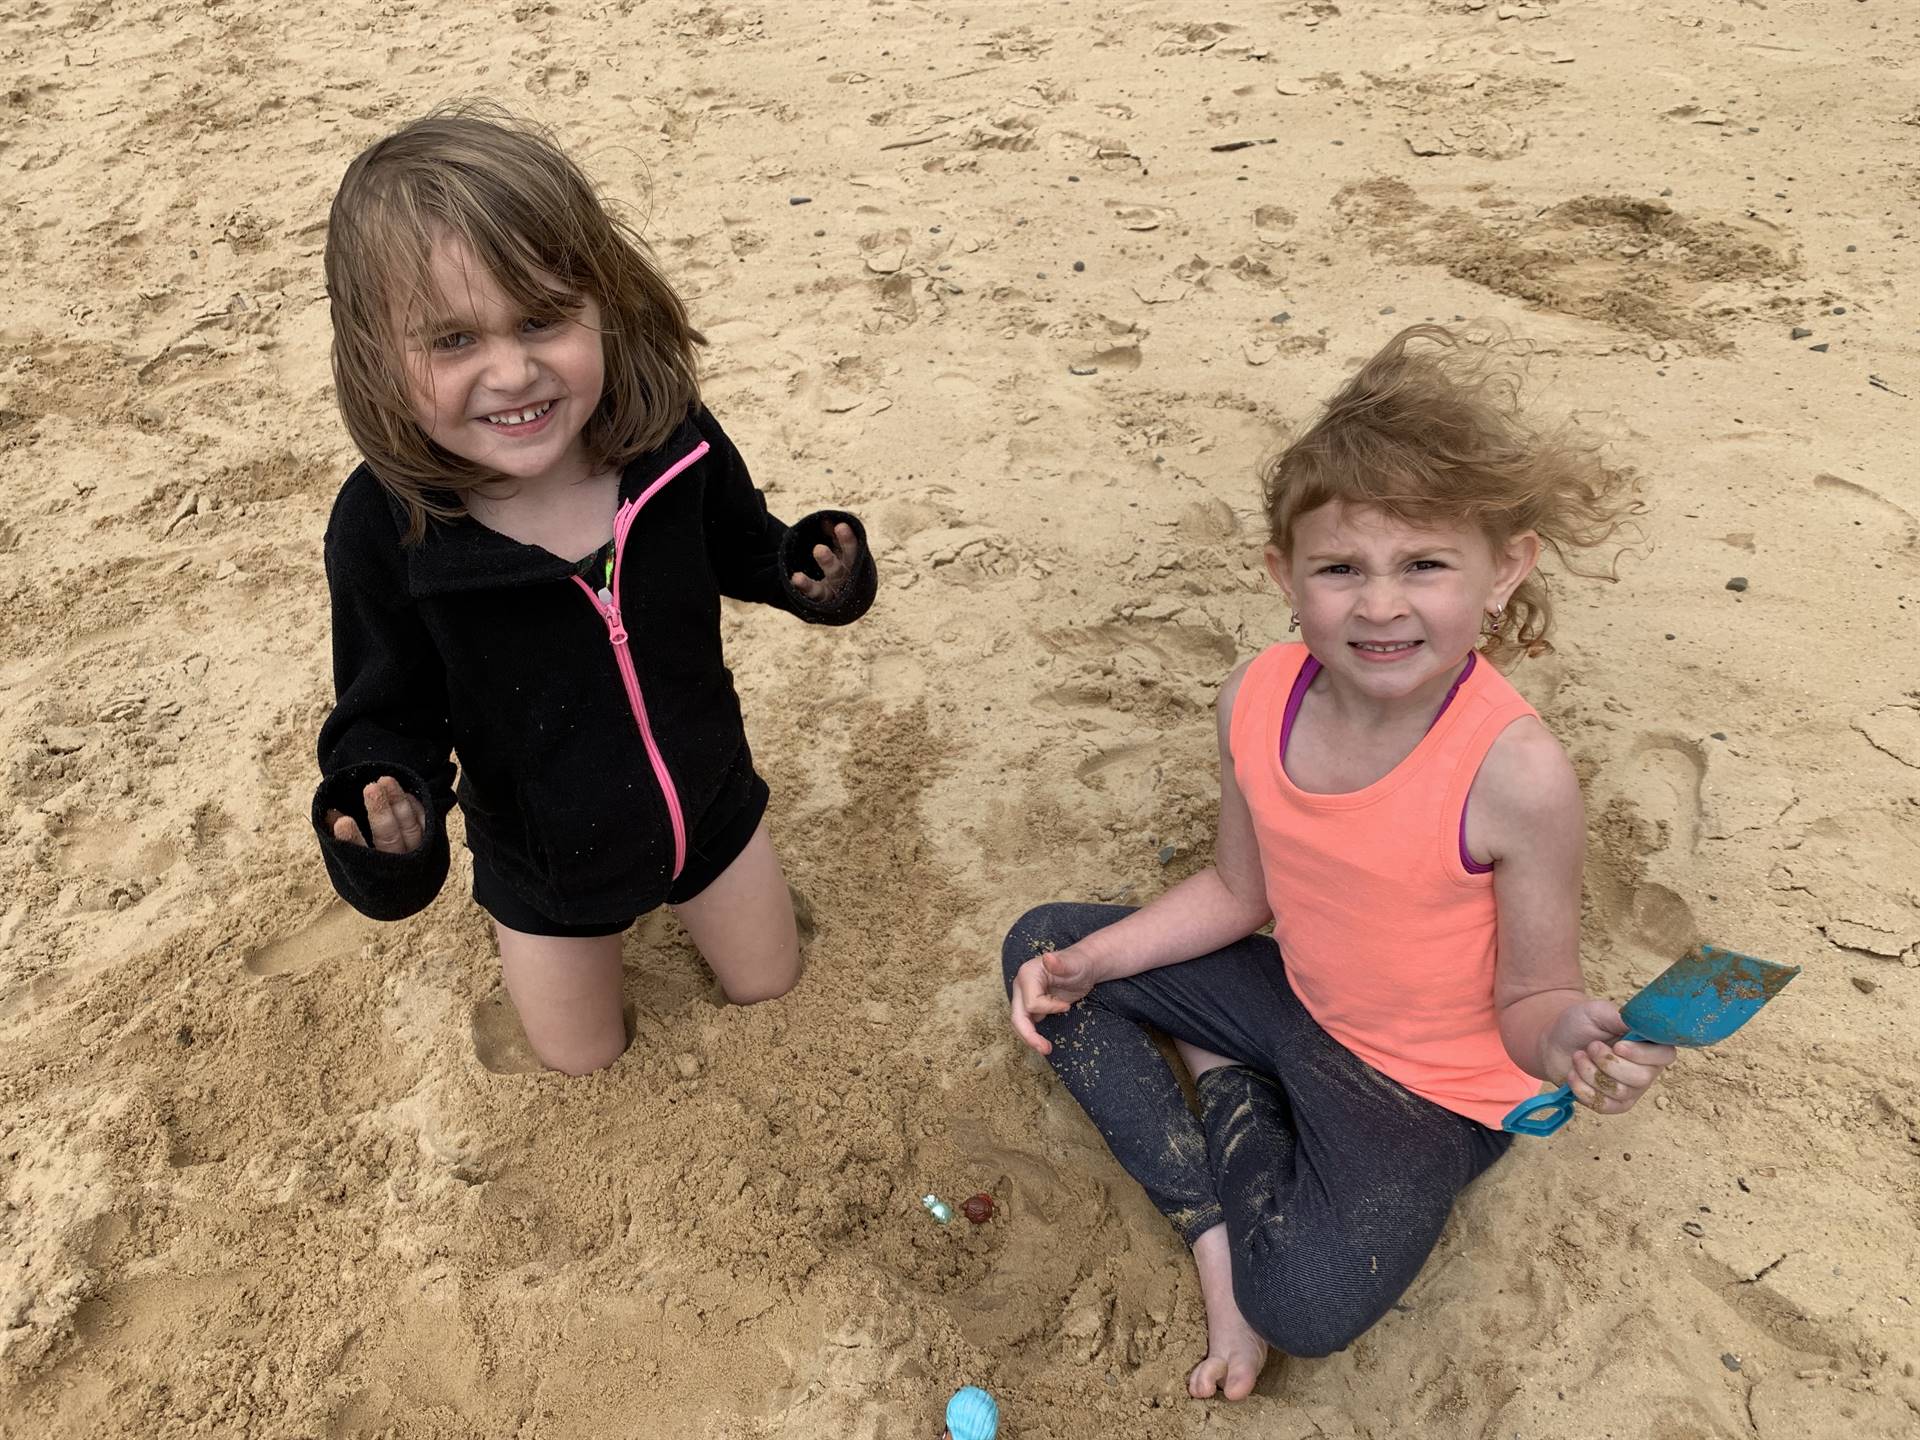 2 students play in sand together.